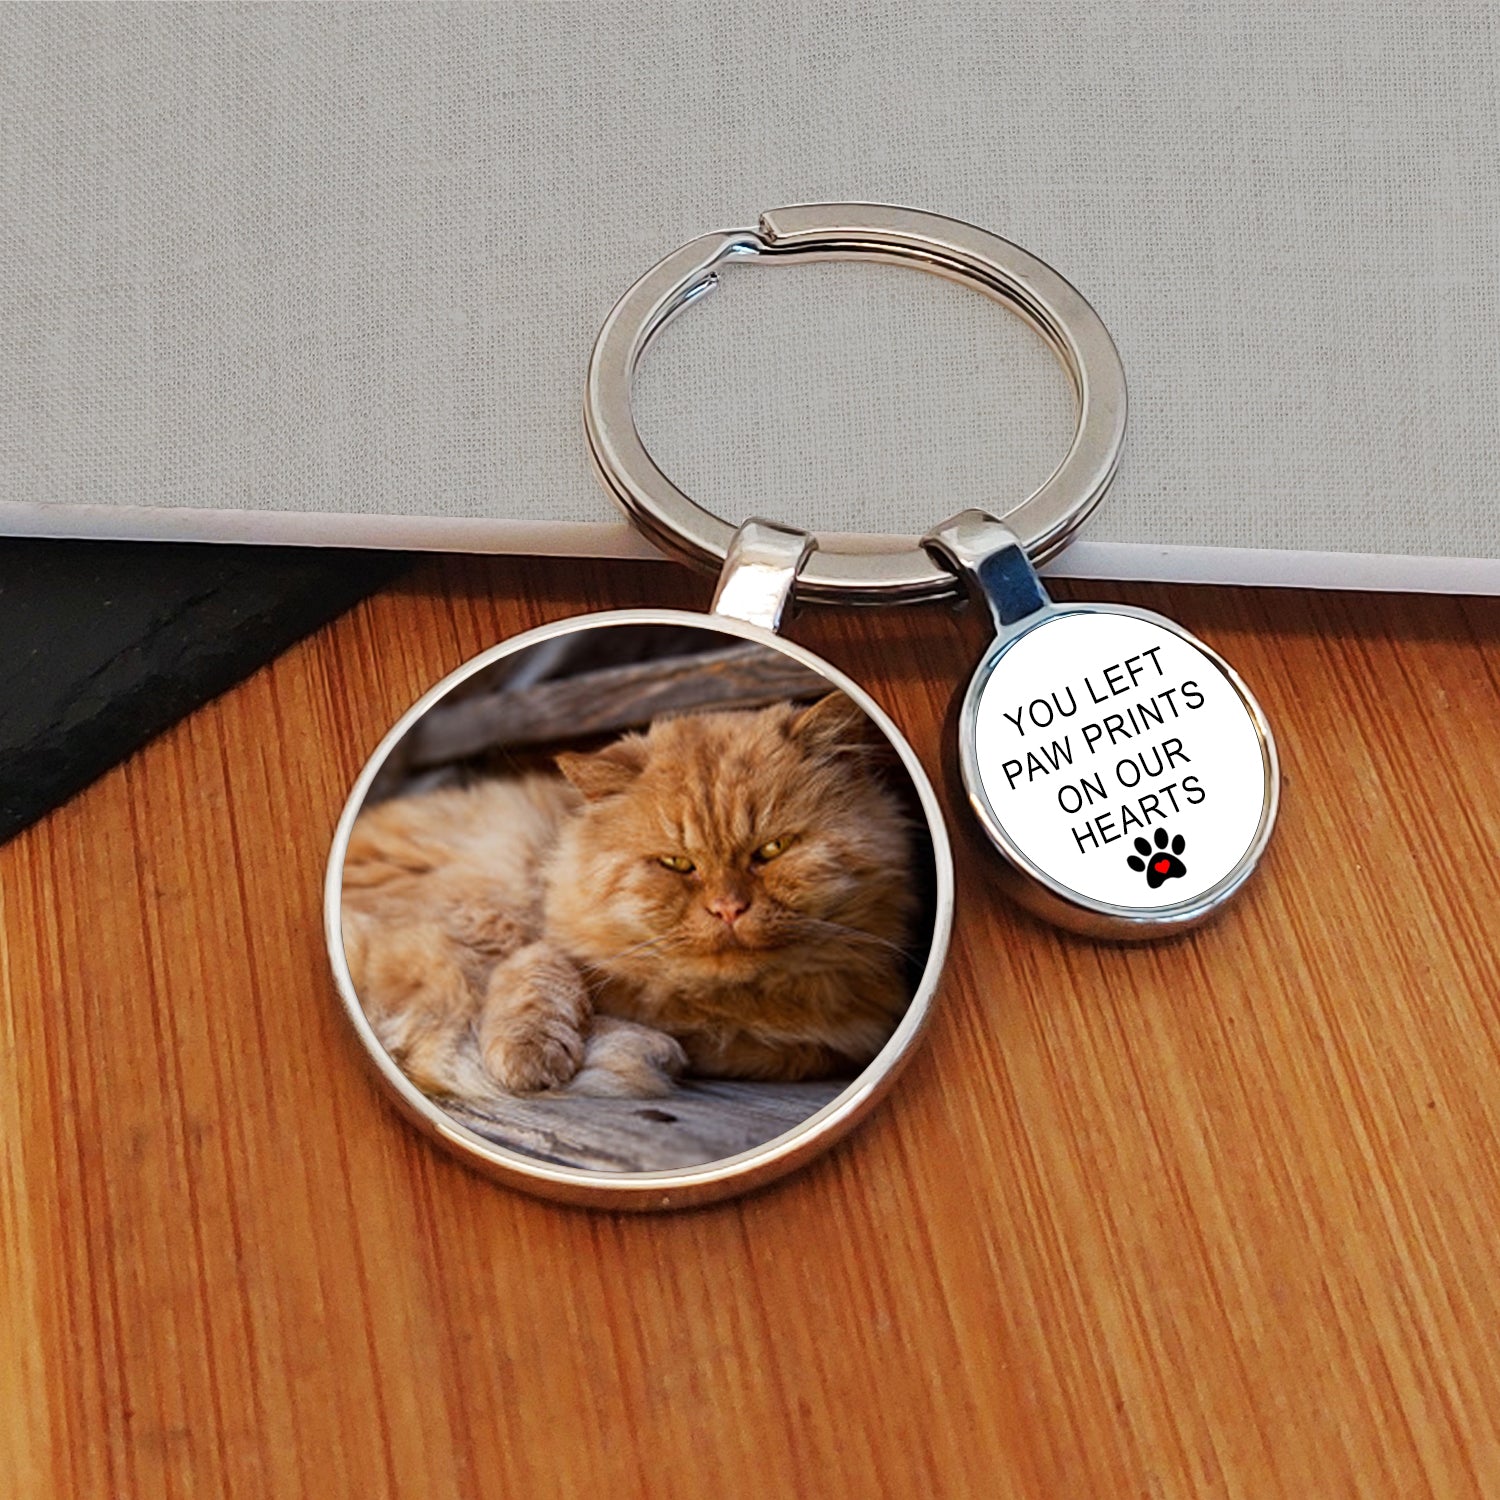 Pet Memorial Photo Upload Keyring - You Left Paw Prints On Our Hearts